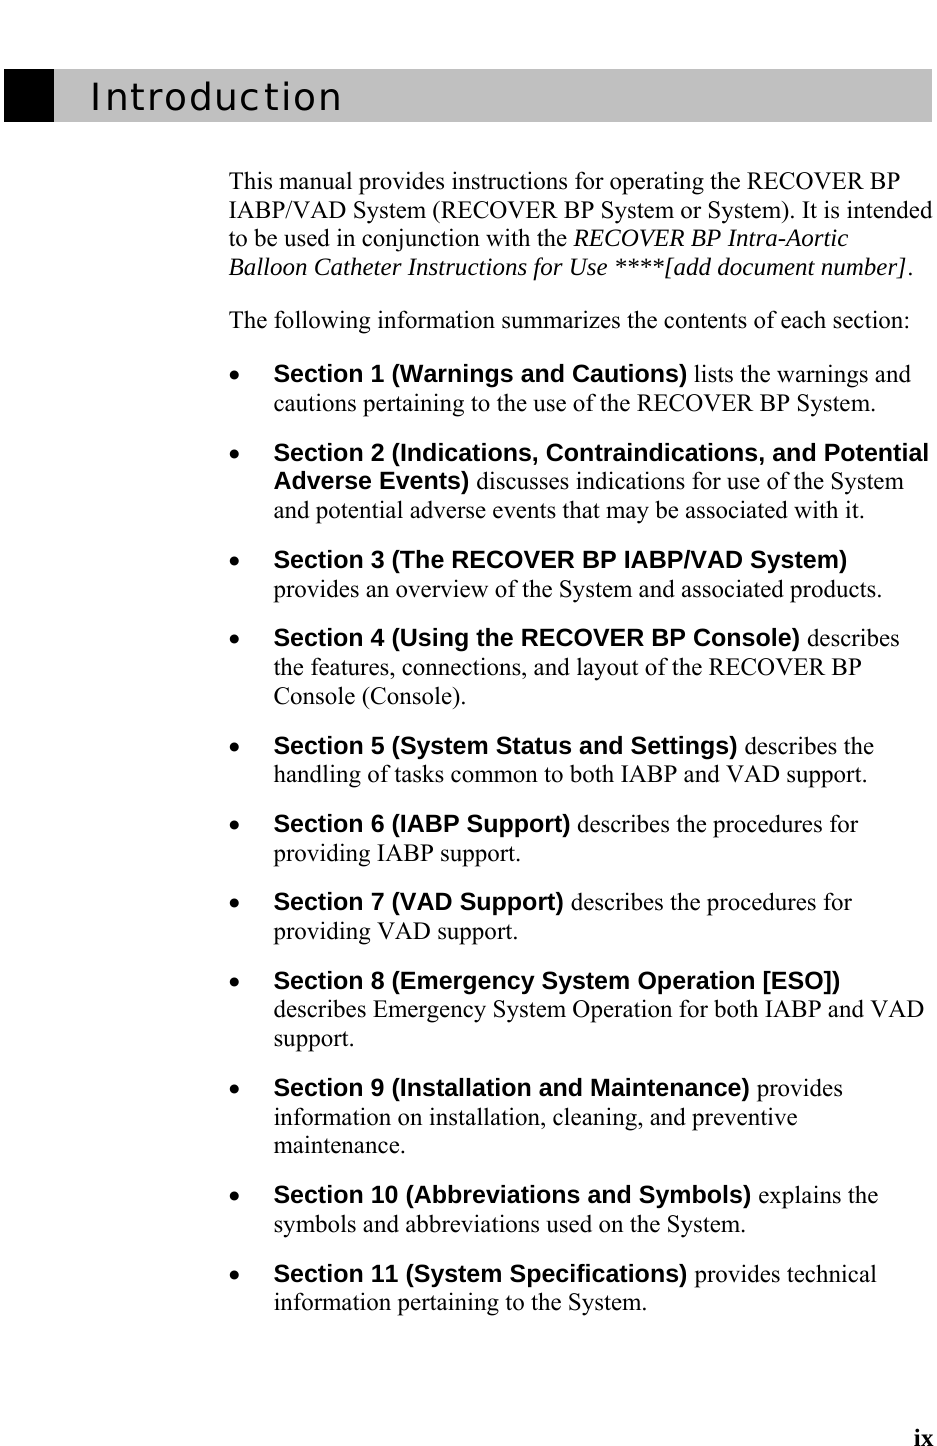   ix         Introduction     This manual provides instructions for operating the RECOVER BP IABP/VAD System (RECOVER BP System or System). It is intended to be used in conjunction with the RECOVER BP Intra-Aortic Balloon Catheter Instructions for Use ****[add document number].  The following information summarizes the contents of each section:  • Section 1 (Warnings and Cautions) lists the warnings and cautions pertaining to the use of the RECOVER BP System.   • Section 2 (Indications, Contraindications, and Potential Adverse Events) discusses indications for use of the System and potential adverse events that may be associated with it.   • Section 3 (The RECOVER BP IABP/VAD System) provides an overview of the System and associated products.  • Section 4 (Using the RECOVER BP Console) describes the features, connections, and layout of the RECOVER BP Console (Console).   • Section 5 (System Status and Settings) describes the handling of tasks common to both IABP and VAD support.  • Section 6 (IABP Support) describes the procedures for providing IABP support.   • Section 7 (VAD Support) describes the procedures for providing VAD support.   • Section 8 (Emergency System Operation [ESO]) describes Emergency System Operation for both IABP and VAD support.   • Section 9 (Installation and Maintenance) provides information on installation, cleaning, and preventive maintenance.  • Section 10 (Abbreviations and Symbols) explains the symbols and abbreviations used on the System.   • Section 11 (System Specifications) provides technical information pertaining to the System.  